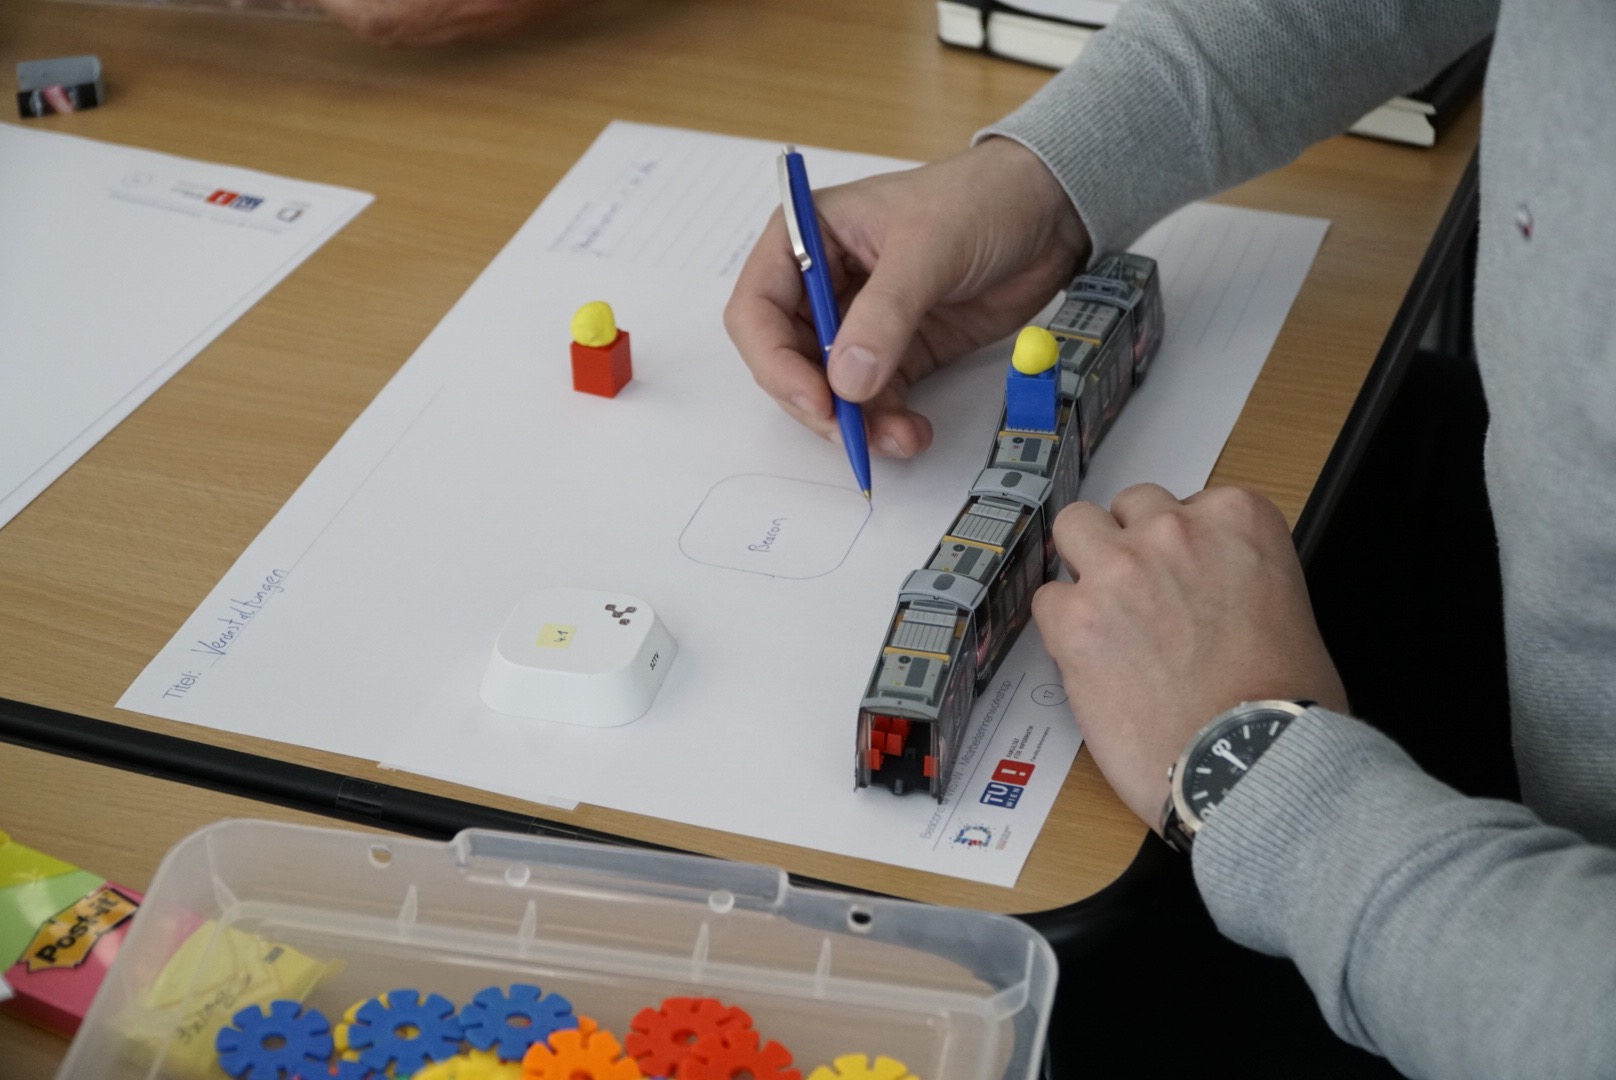 A workshop participant drawing his idea of how to integrate beacons into the public transport system of Vienna.
                  Here, he uses Lego blocks and modeling clay to create workers, where the yellow clay way used for construction site hats.